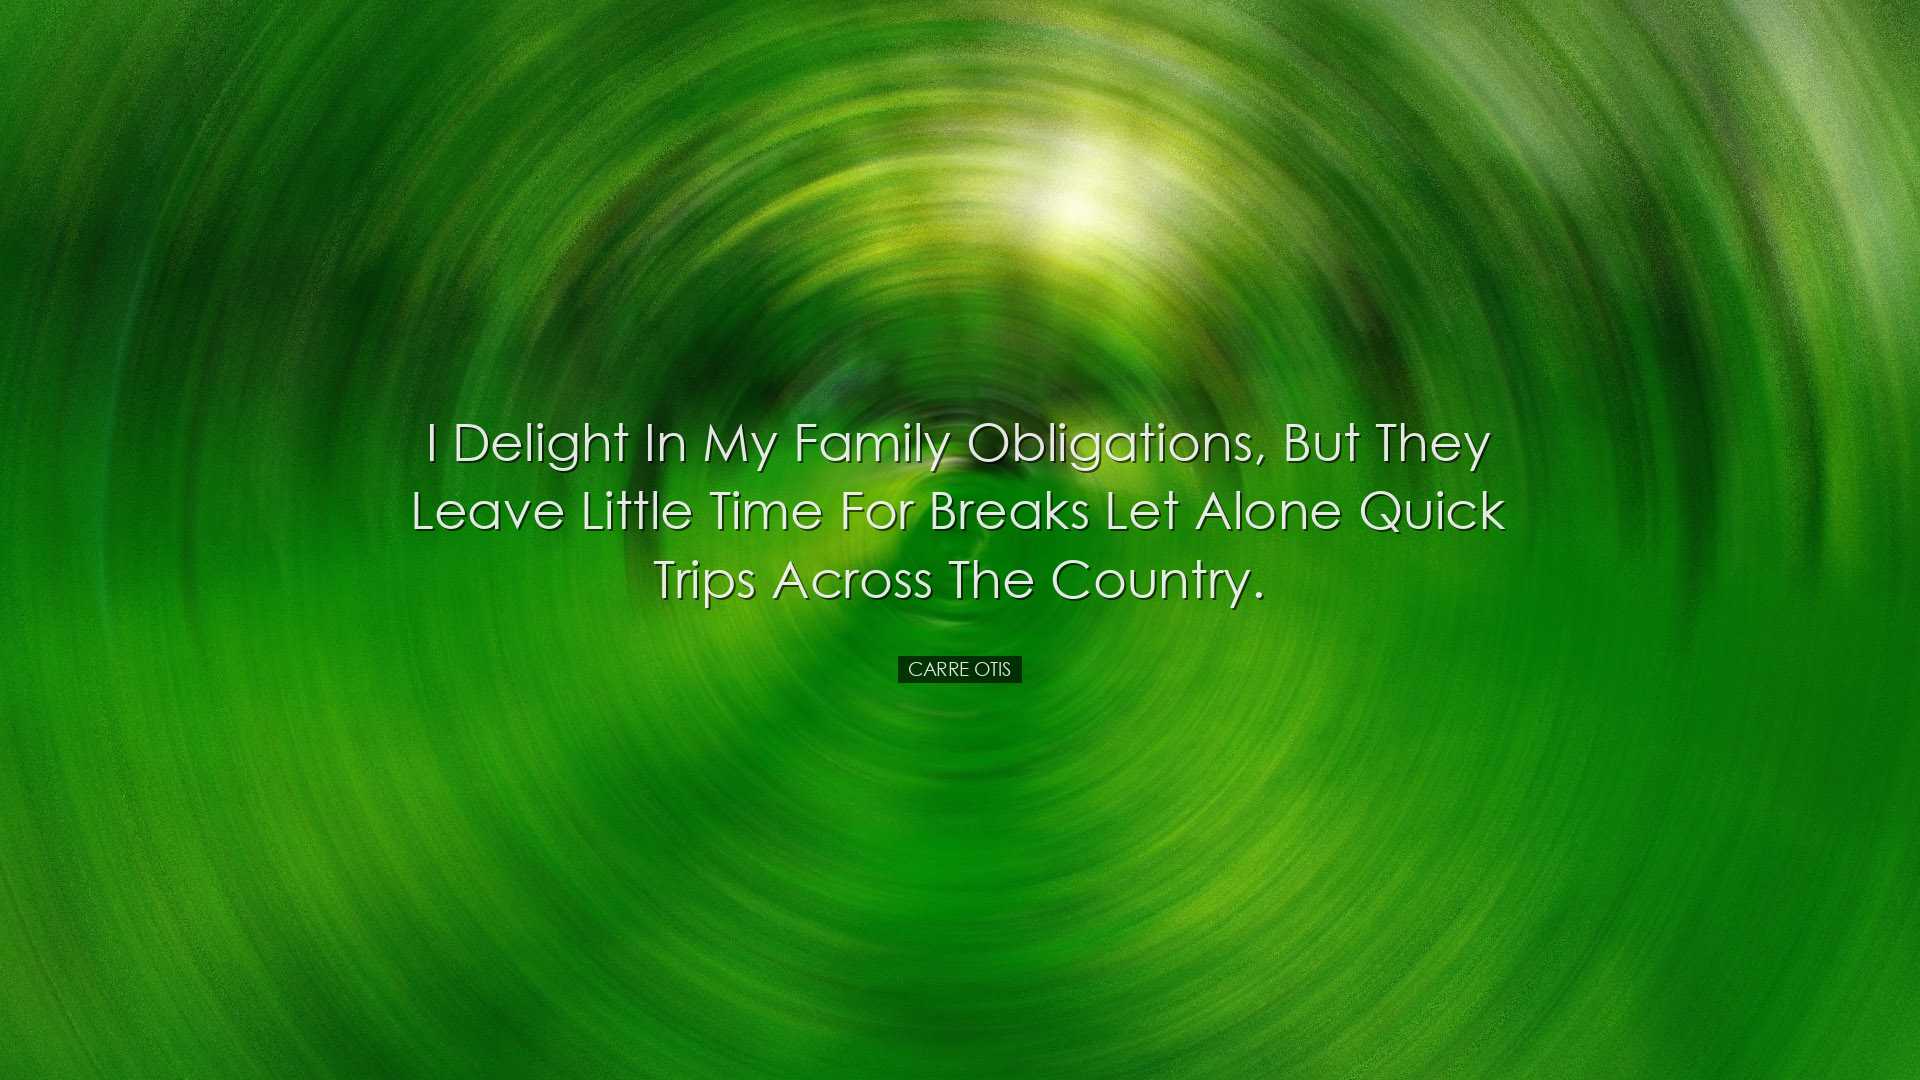 I delight in my family obligations, but they leave little time for